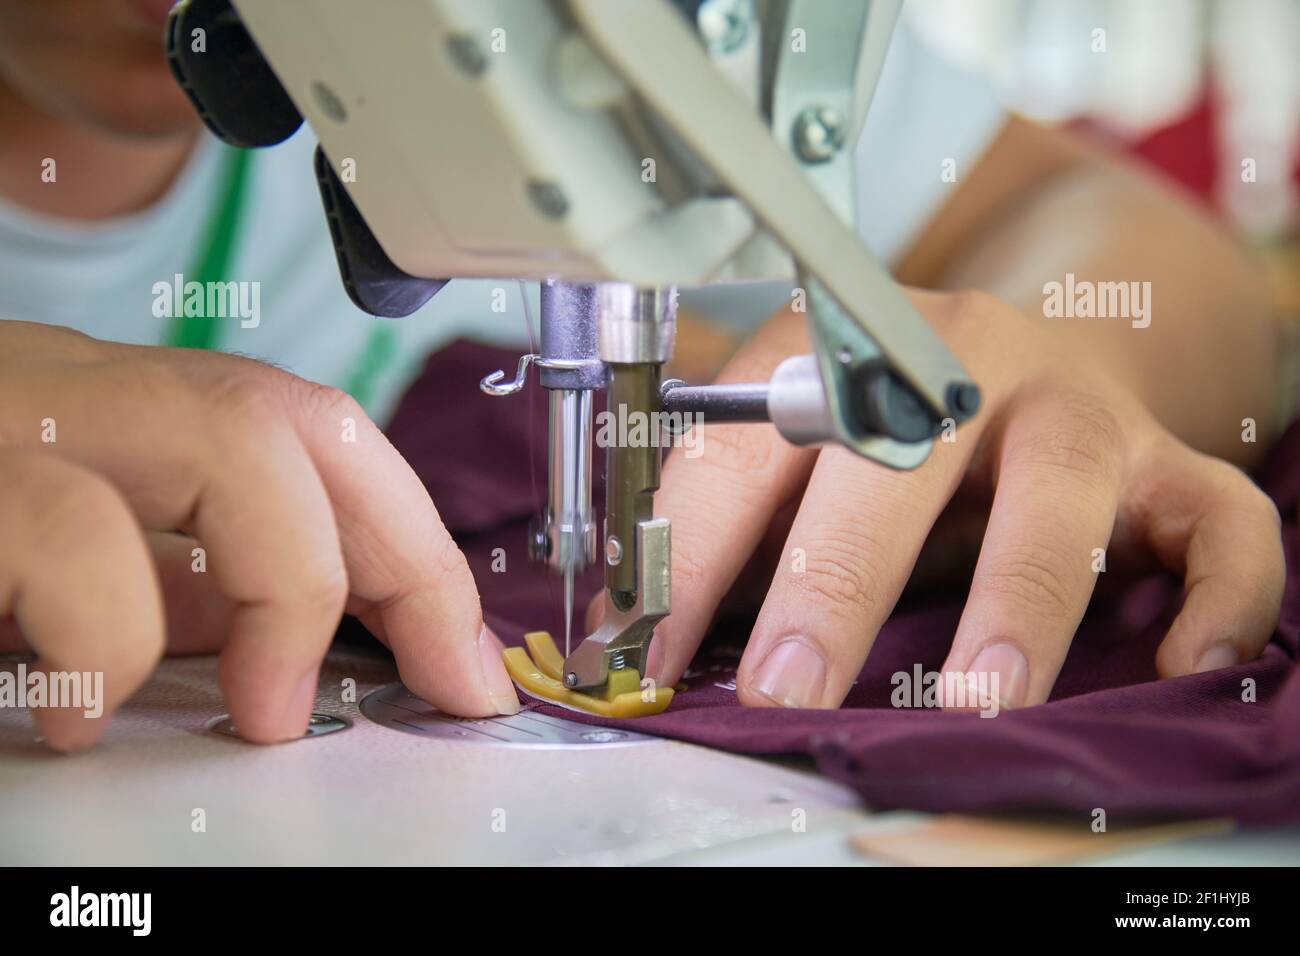 Employee's hands working with his sewing machine in clothing factory Stock Photo